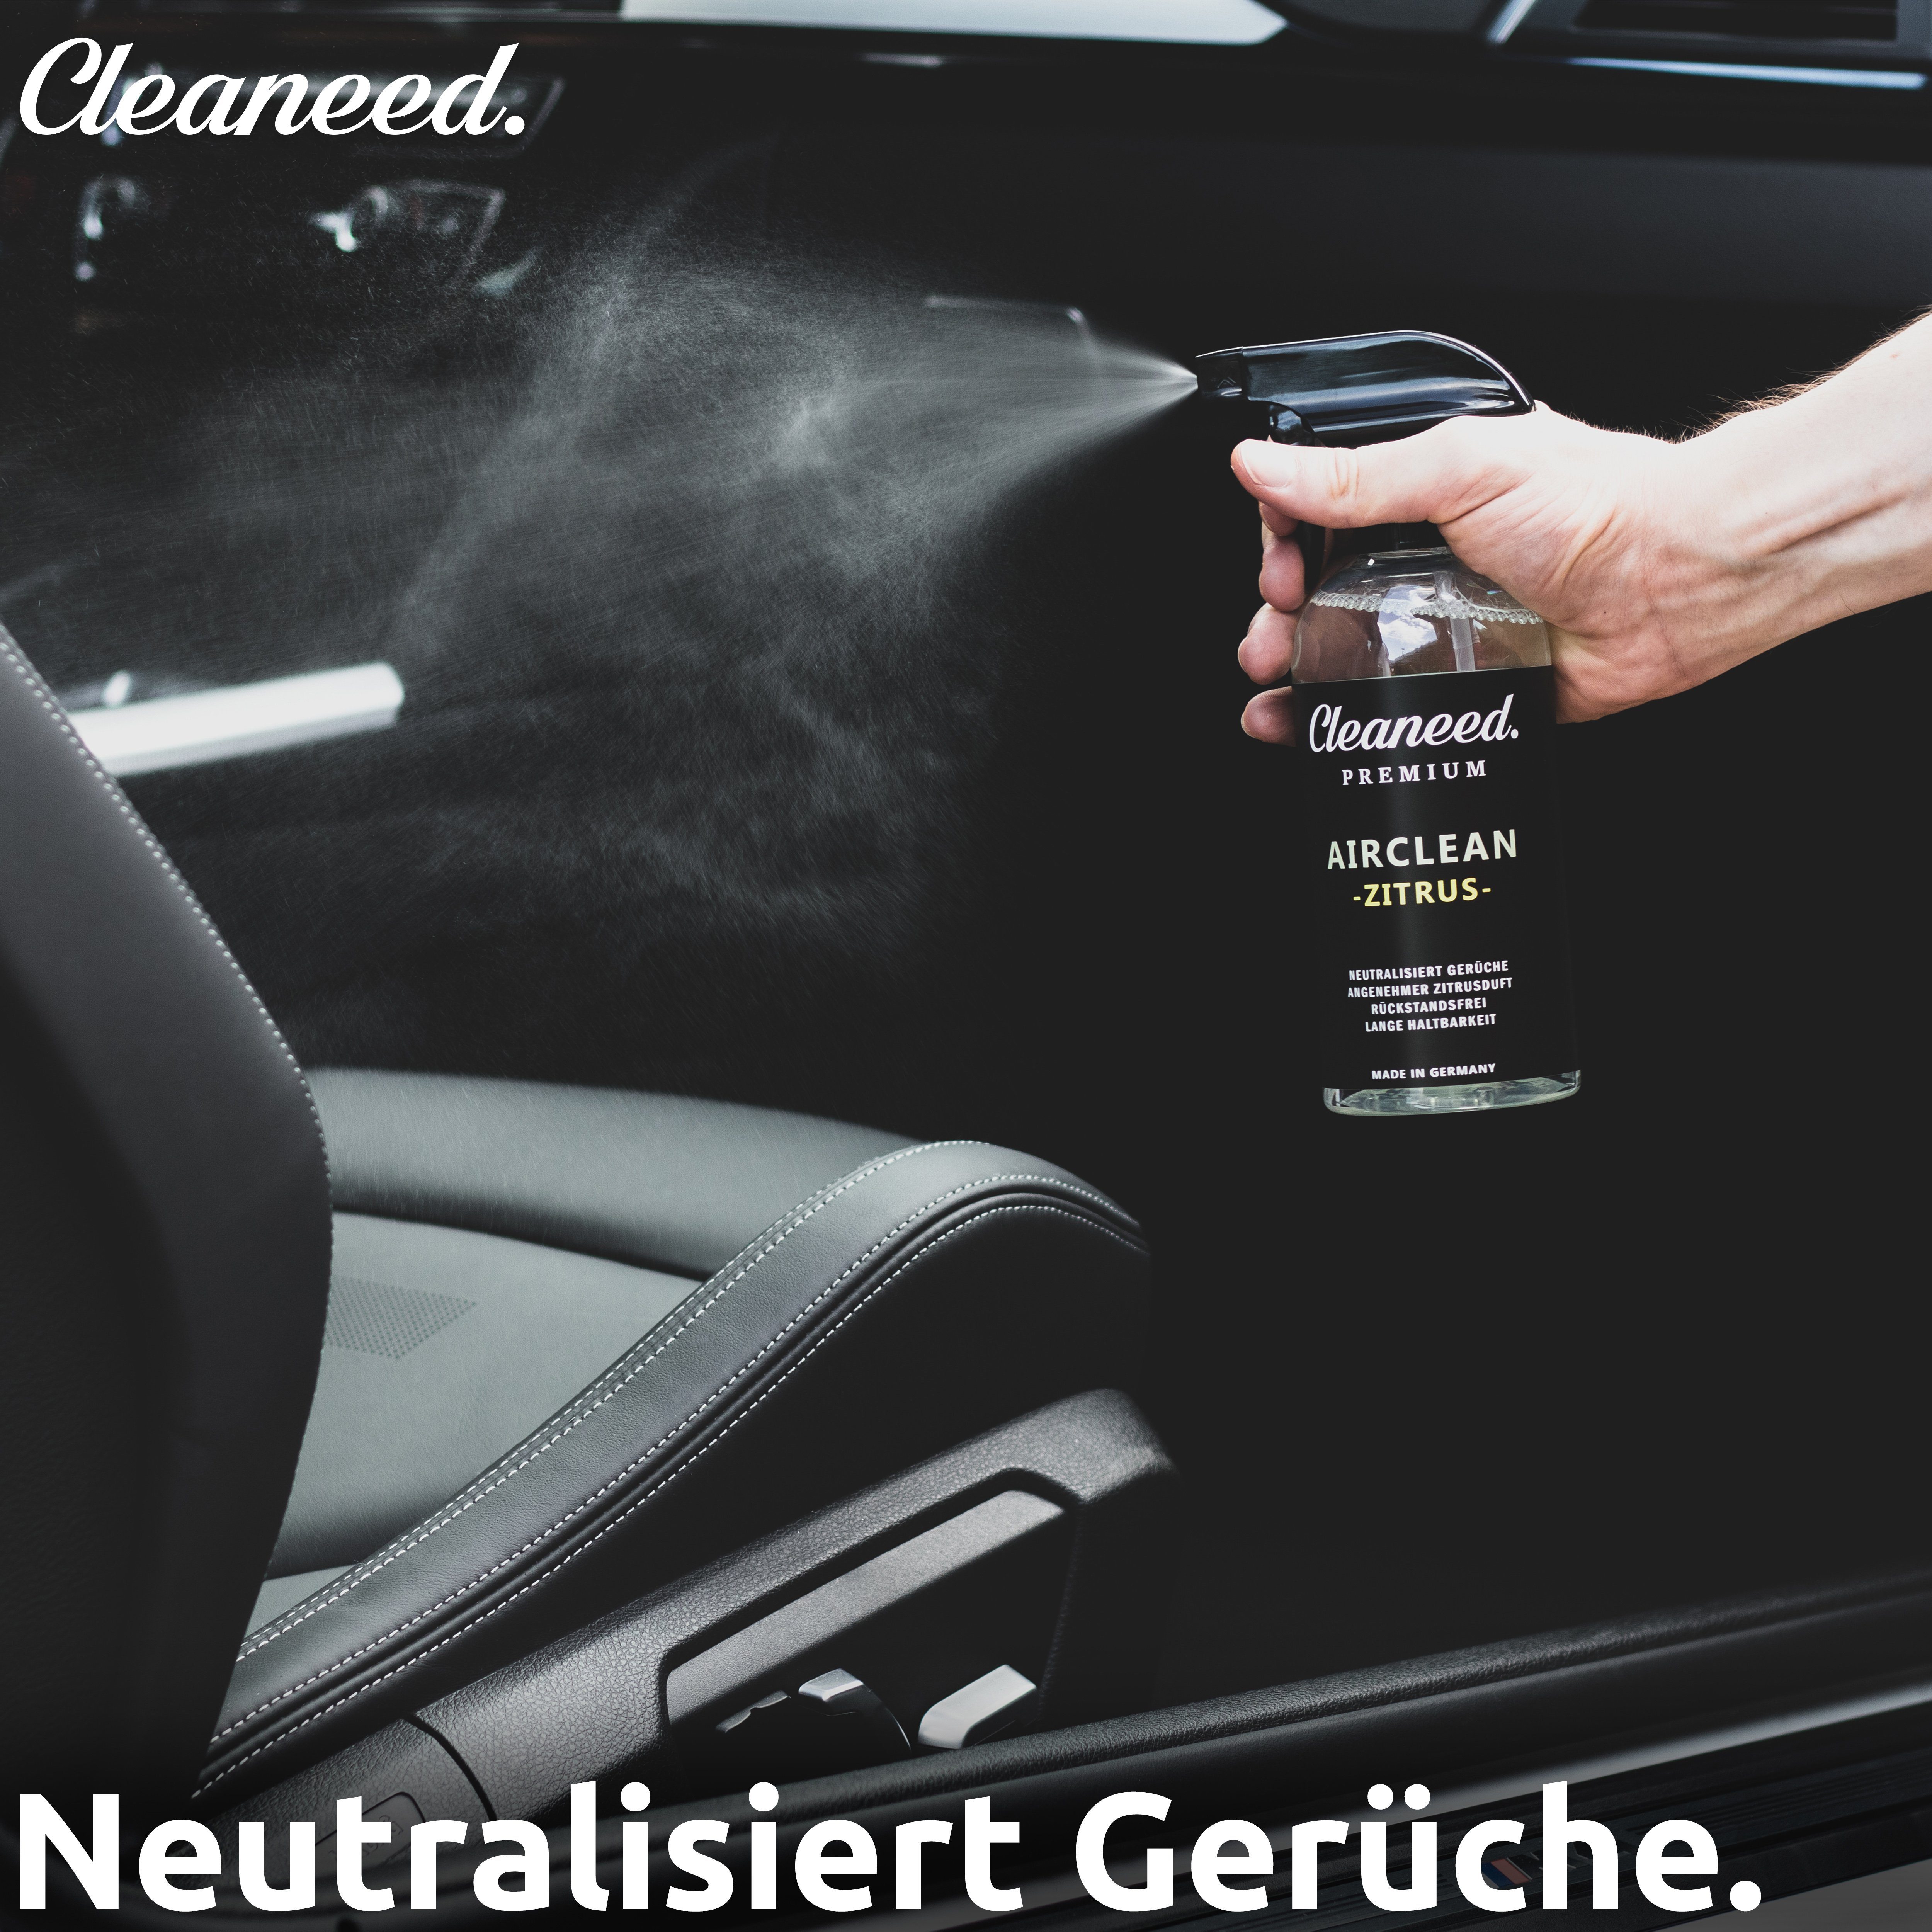 Cleaneed Premium Airclean Zitrus Cockpit-Reiniger (Made in Germany